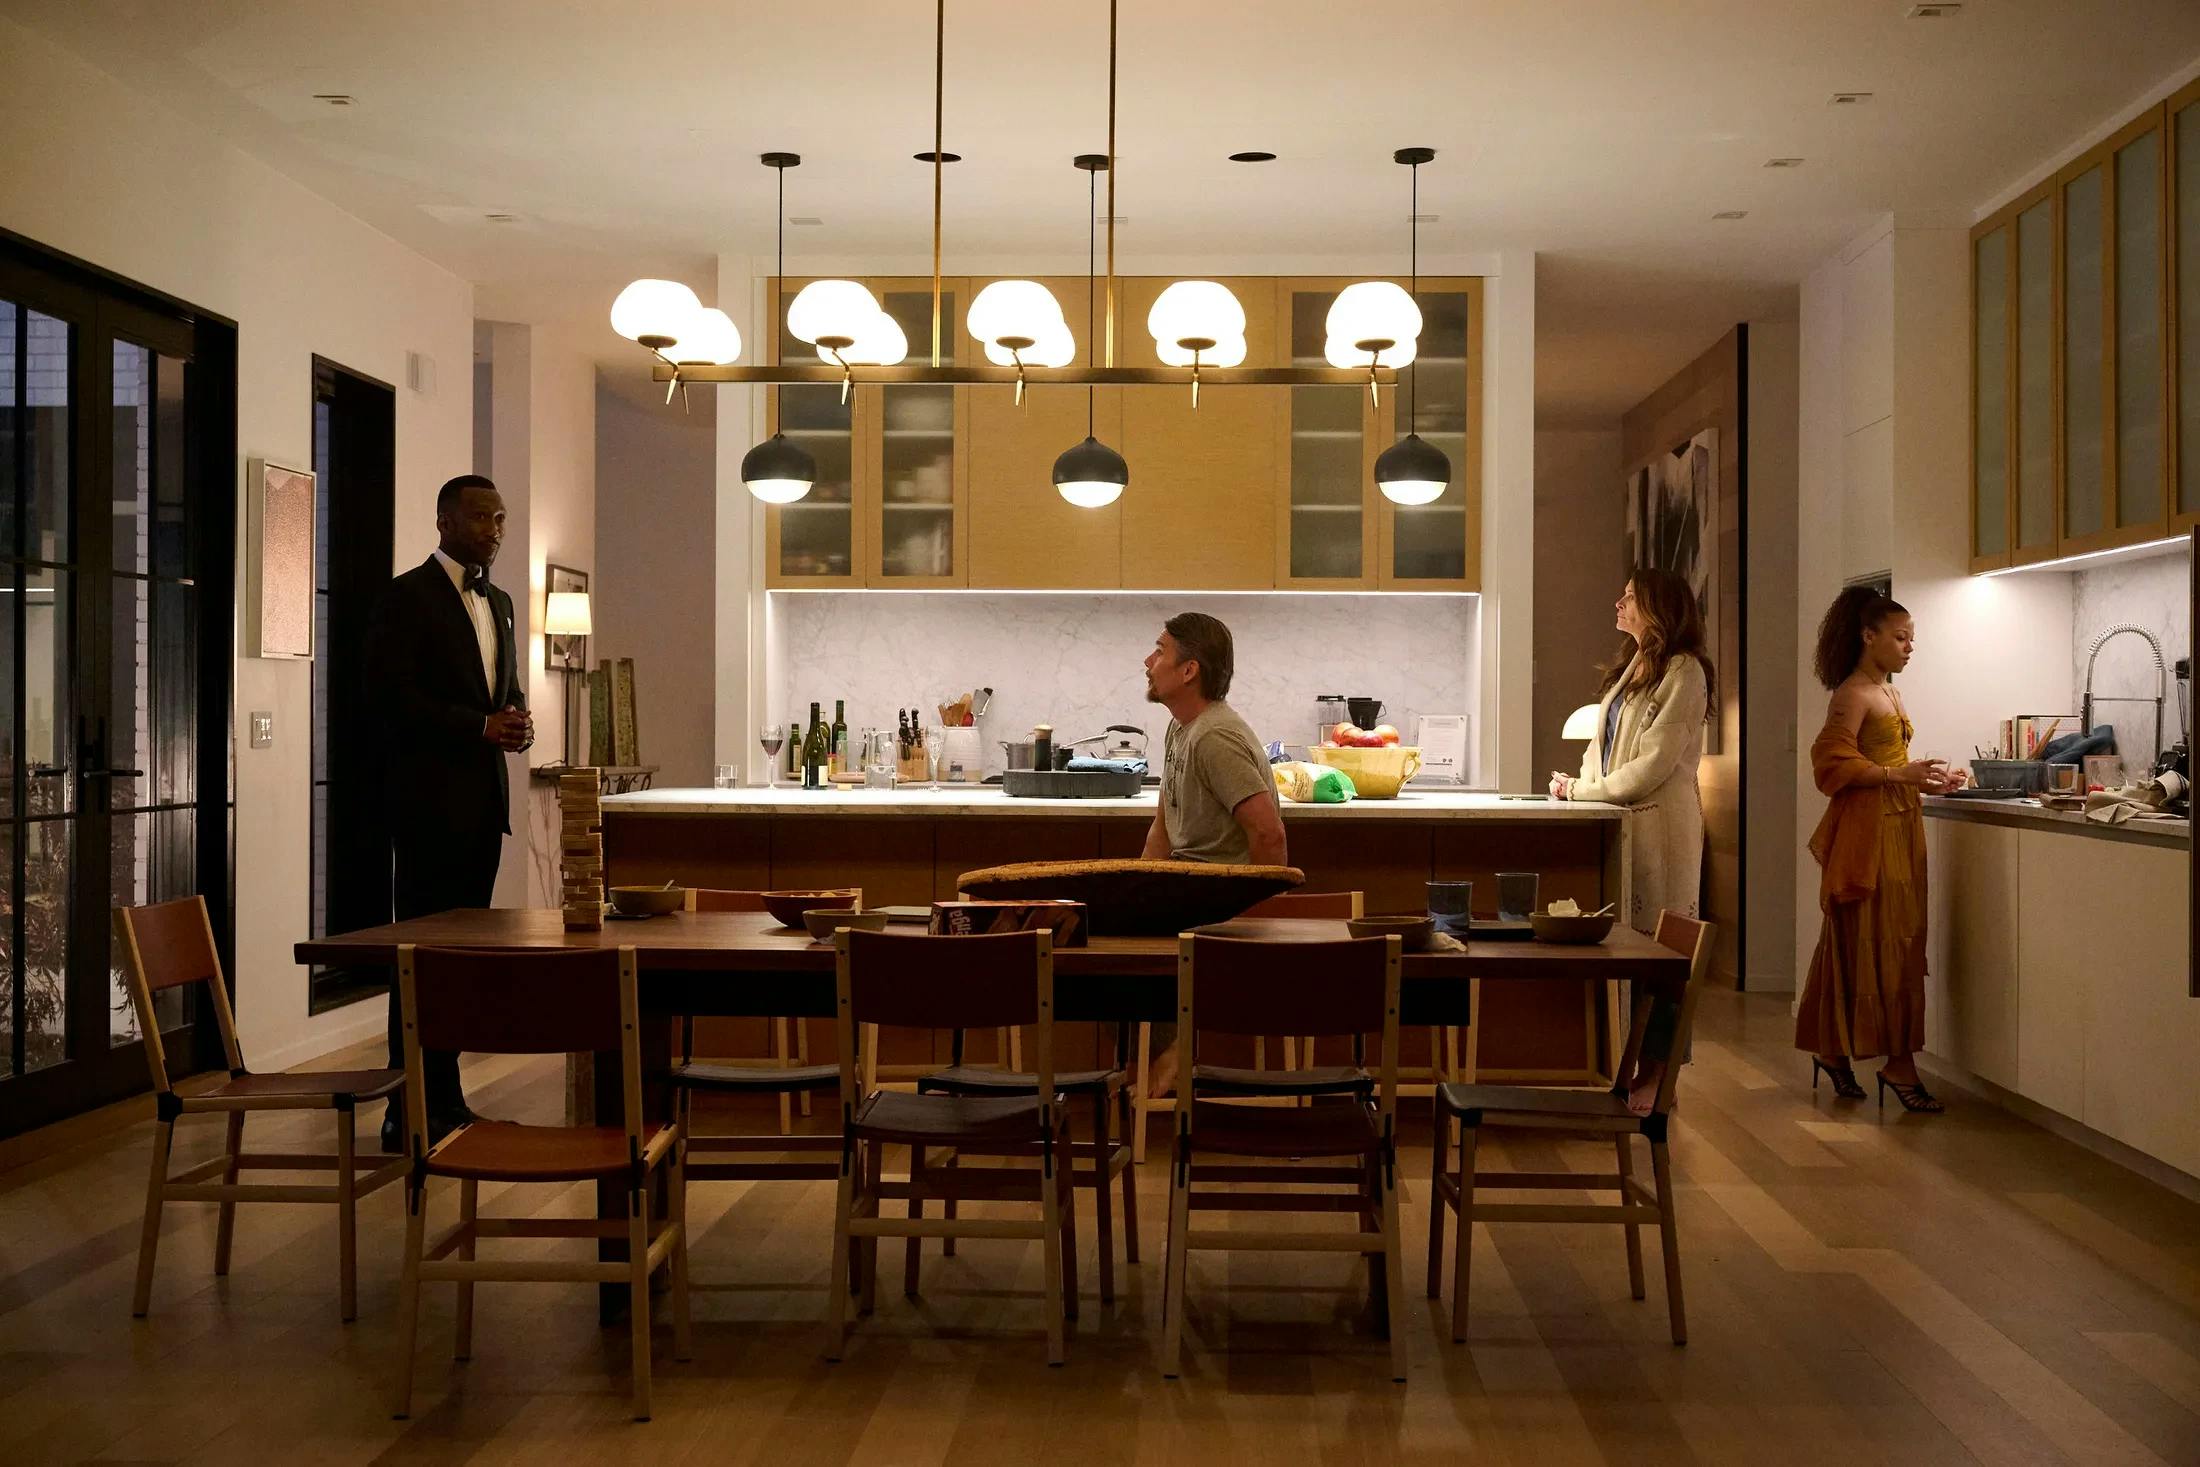  A film still from the Netflix movie, Leave the World Behind, set in a modern kitchen with actors Julia Roberts, Mahershala Ali, Ethan Hawke, & Myha'la Jael Herrold.